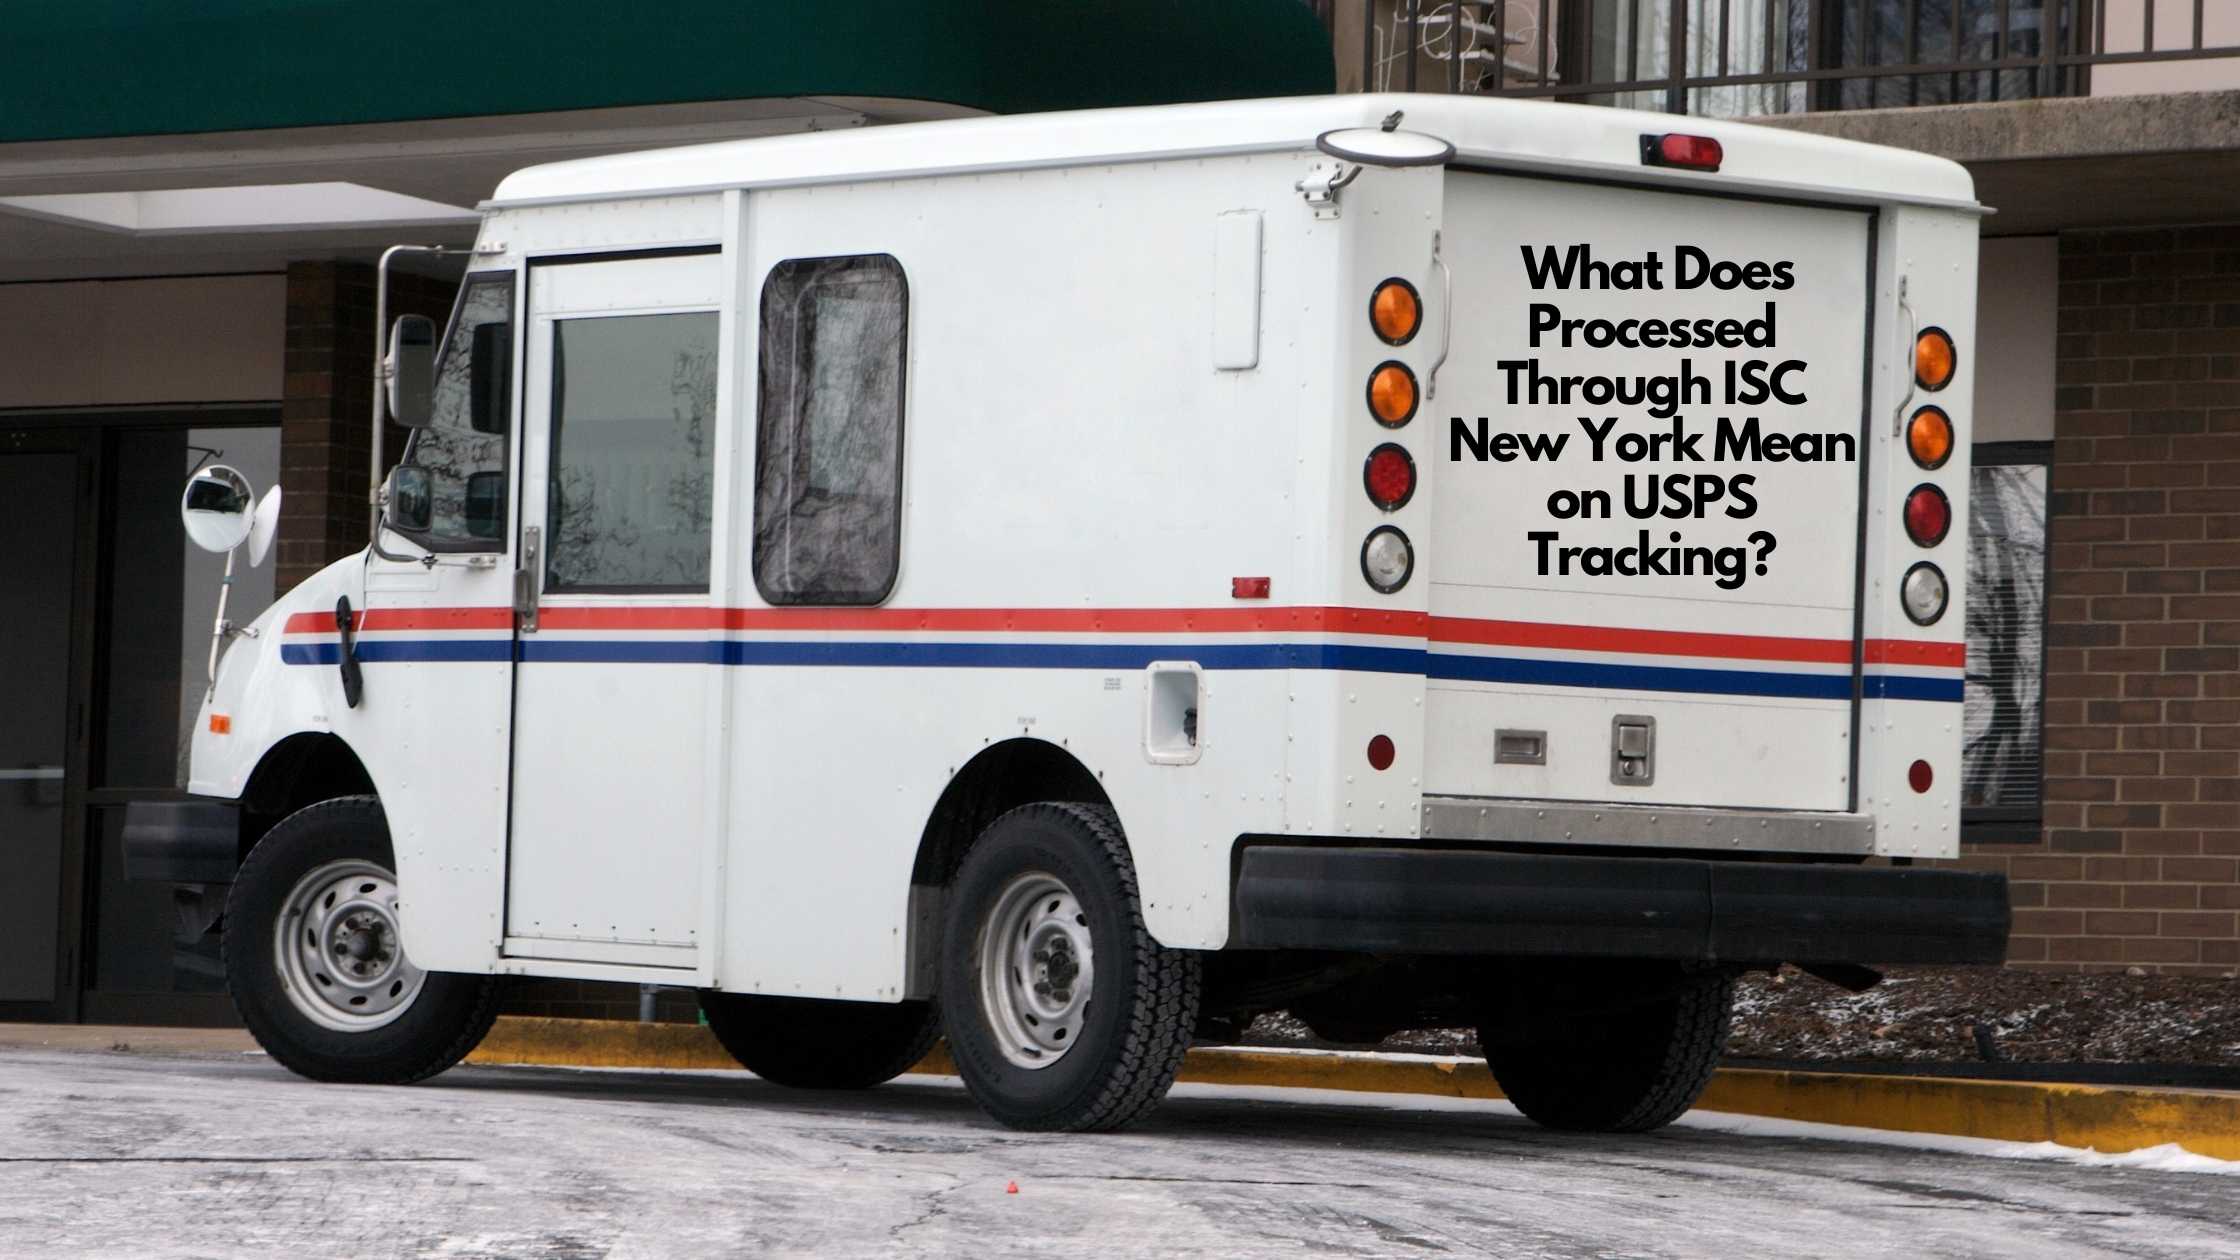 Where does a package go after it leaves the ISC USPS in New York